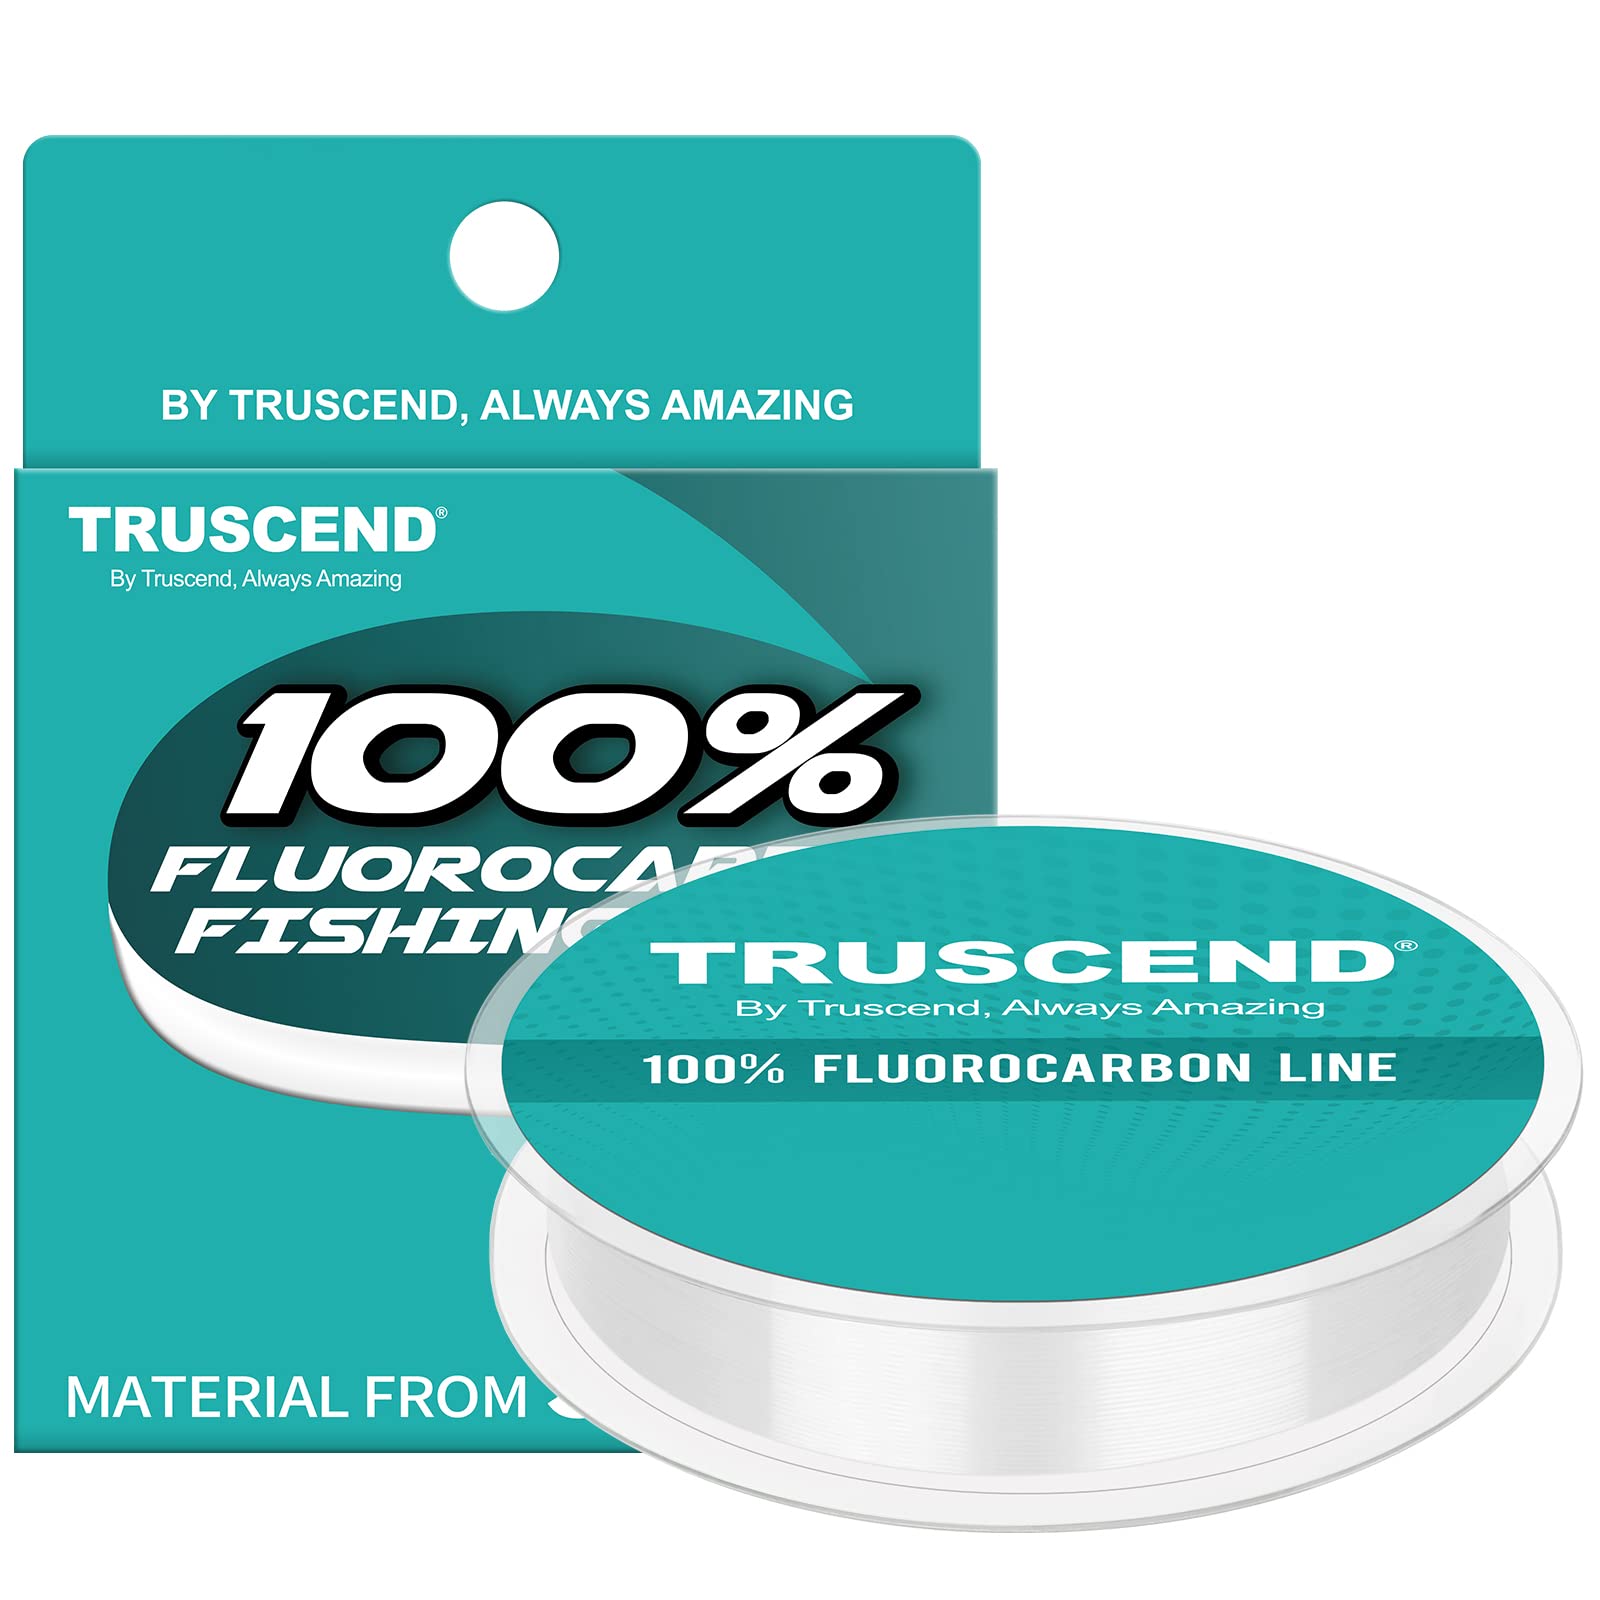 TRUSCEND 100% Fluorocarbon Fishing Line, Japan Material Nrivaled  Sensitivity, Hanging Christmas Ornaments, Beading Thread, Bracelet Making,  Multi-Species Versatility, Superior Castability & Toughness 10lb/0.24mm/54yds  Clear